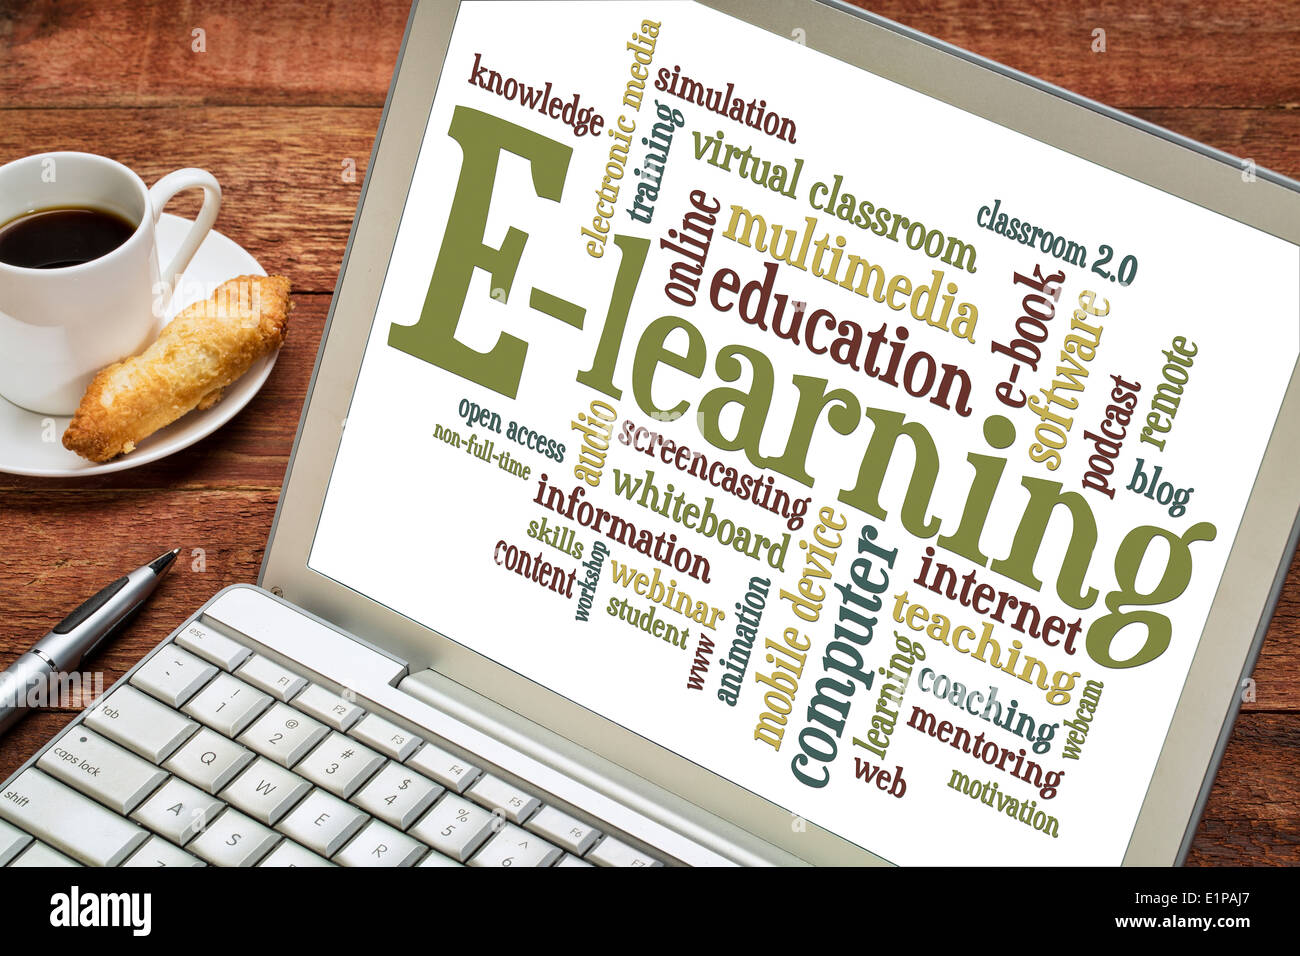 online education concept - e-learning word cloud on a laptop with a cup of coffee Stock Photo